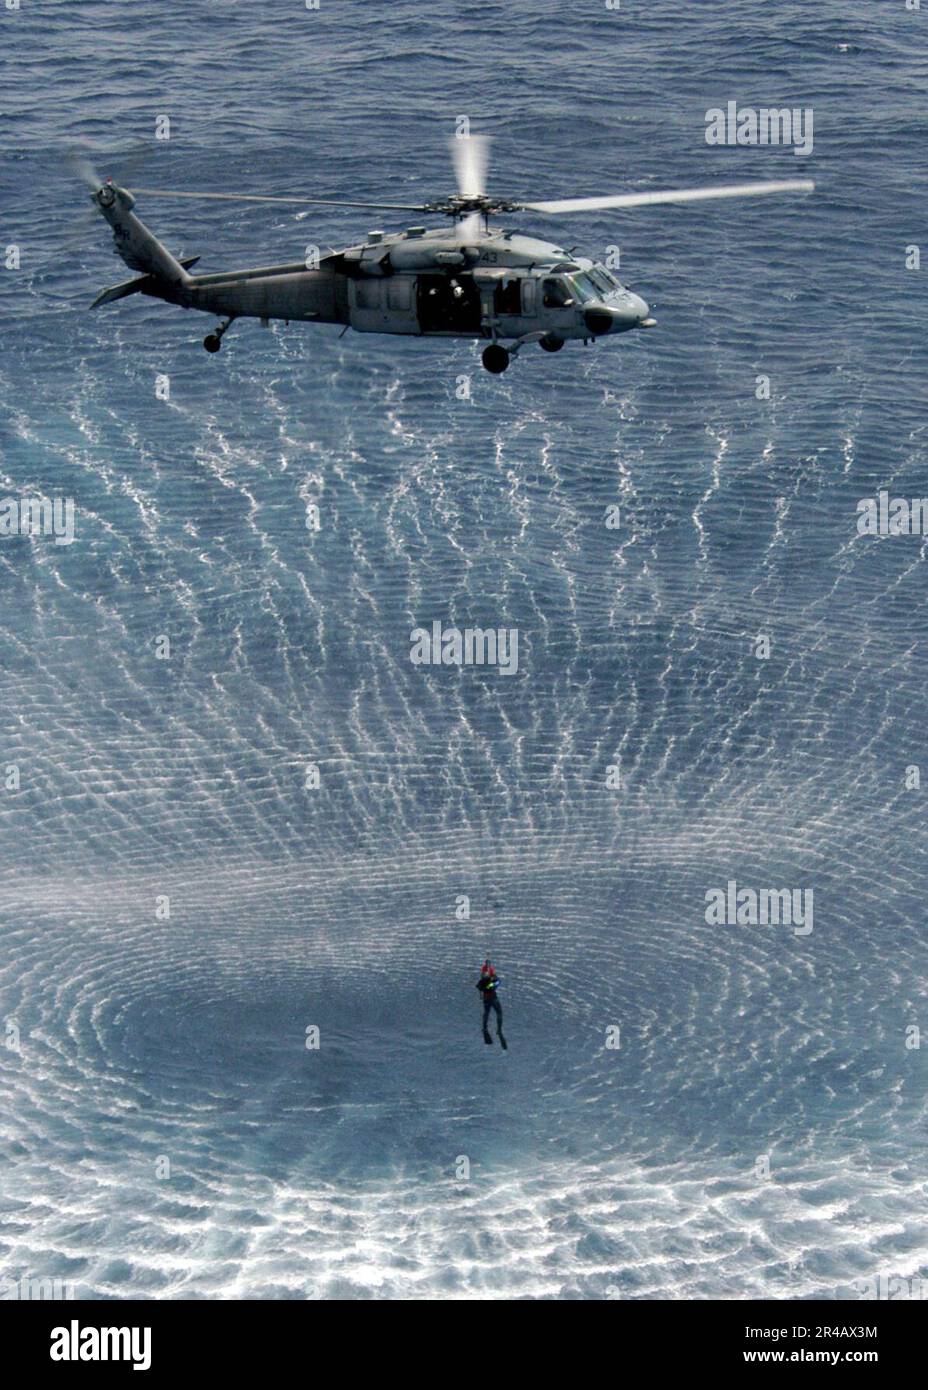 US Navy  Search and Rescue (SAR) swimmers attached to the Kearsarge Expeditionary Strike Group conduct search and rescue training during routine helicopter operations. Stock Photo